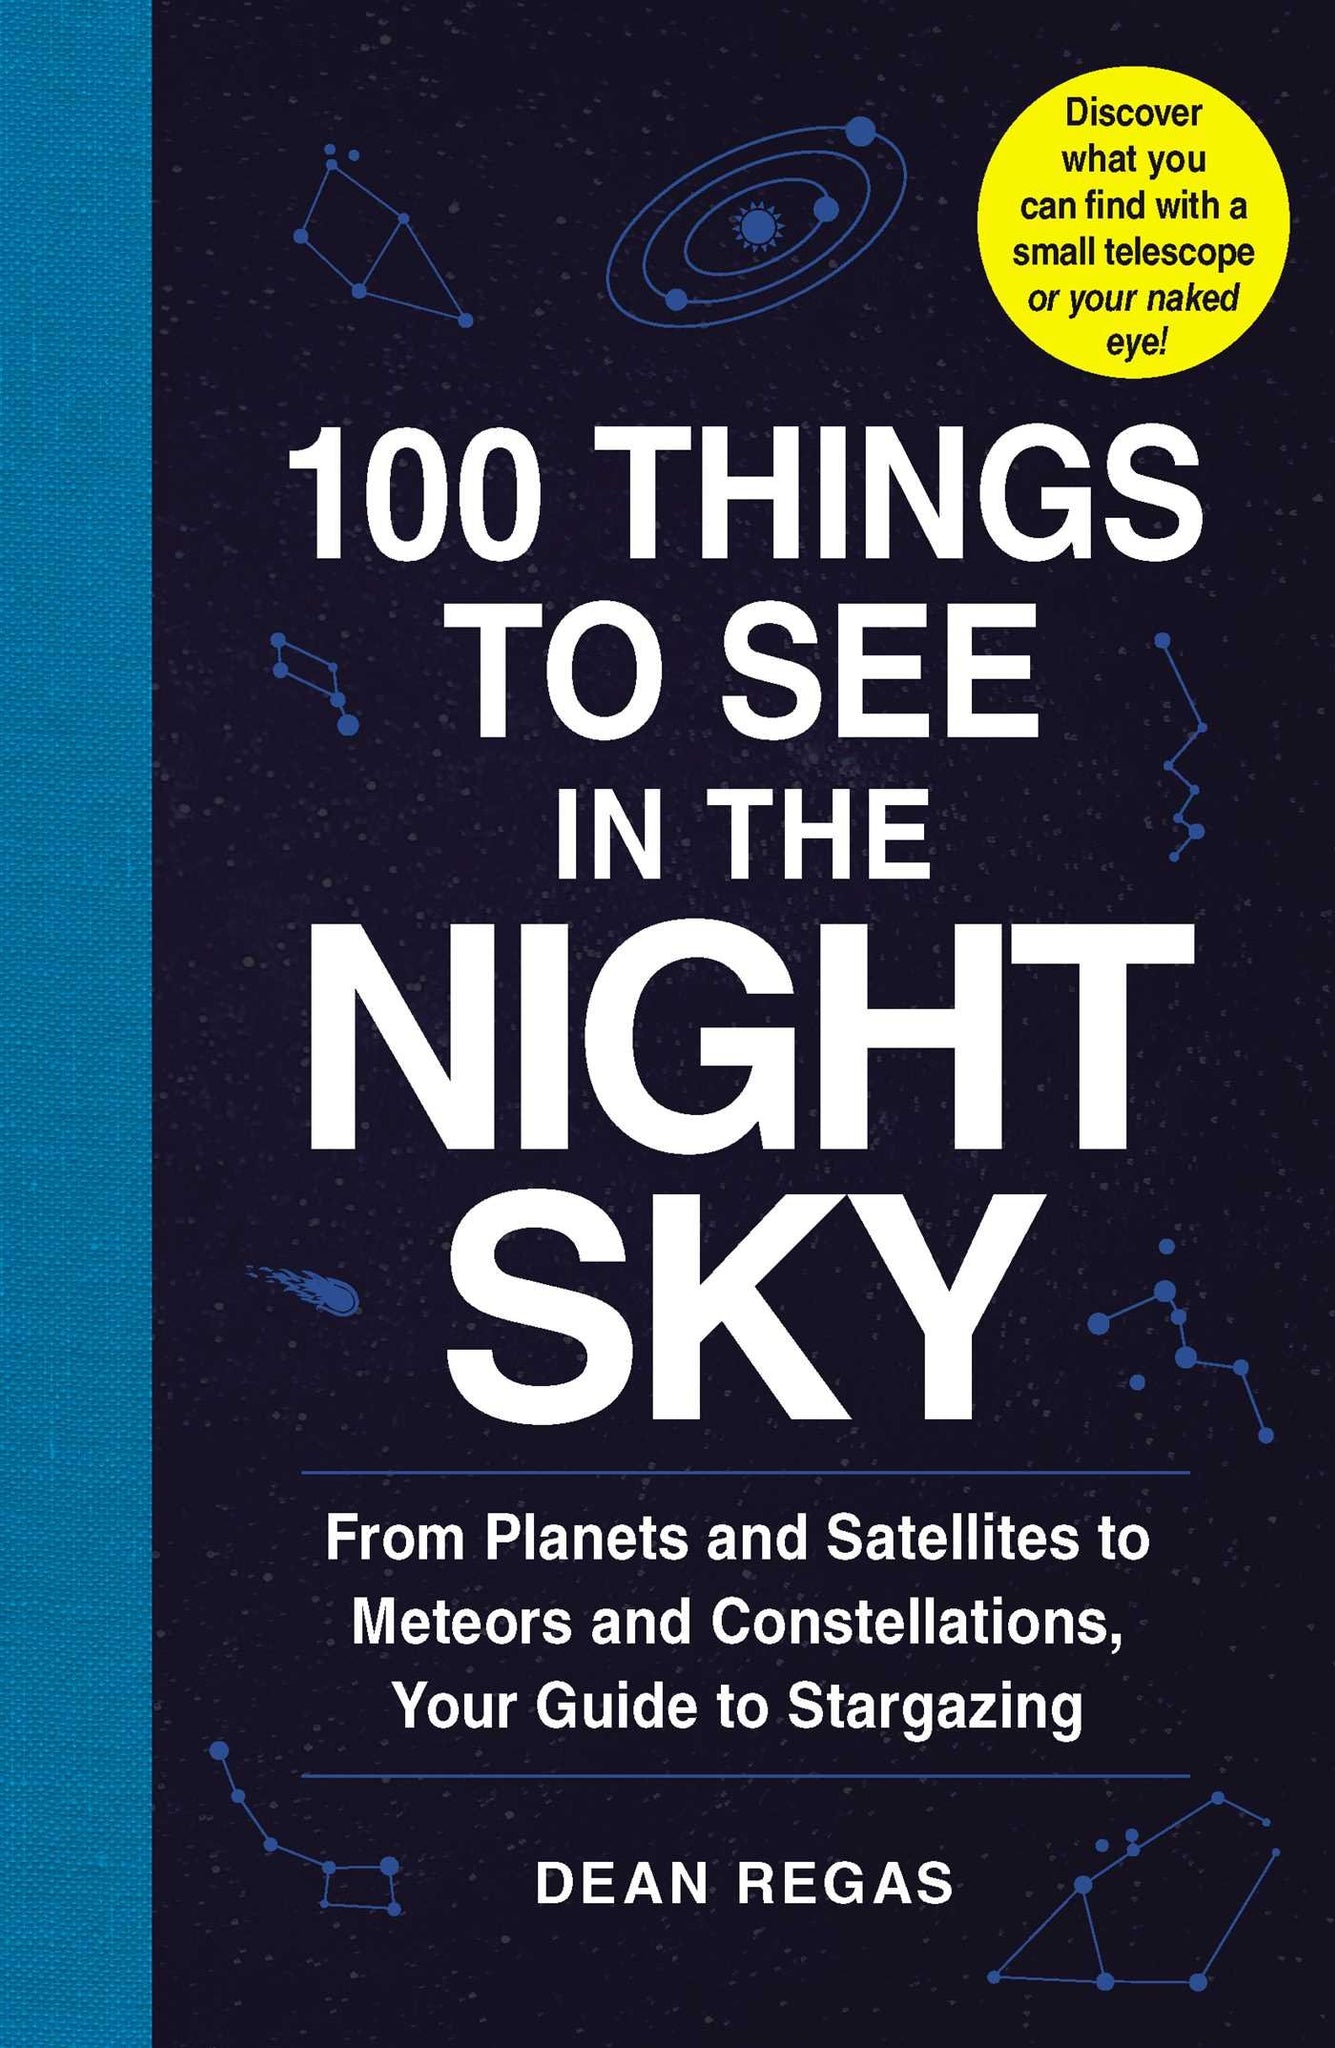 100 Things to See in the Night Sky: From Planets and Satellites to Meteors and Constellations, Your Guide to Stargazing - Paperback